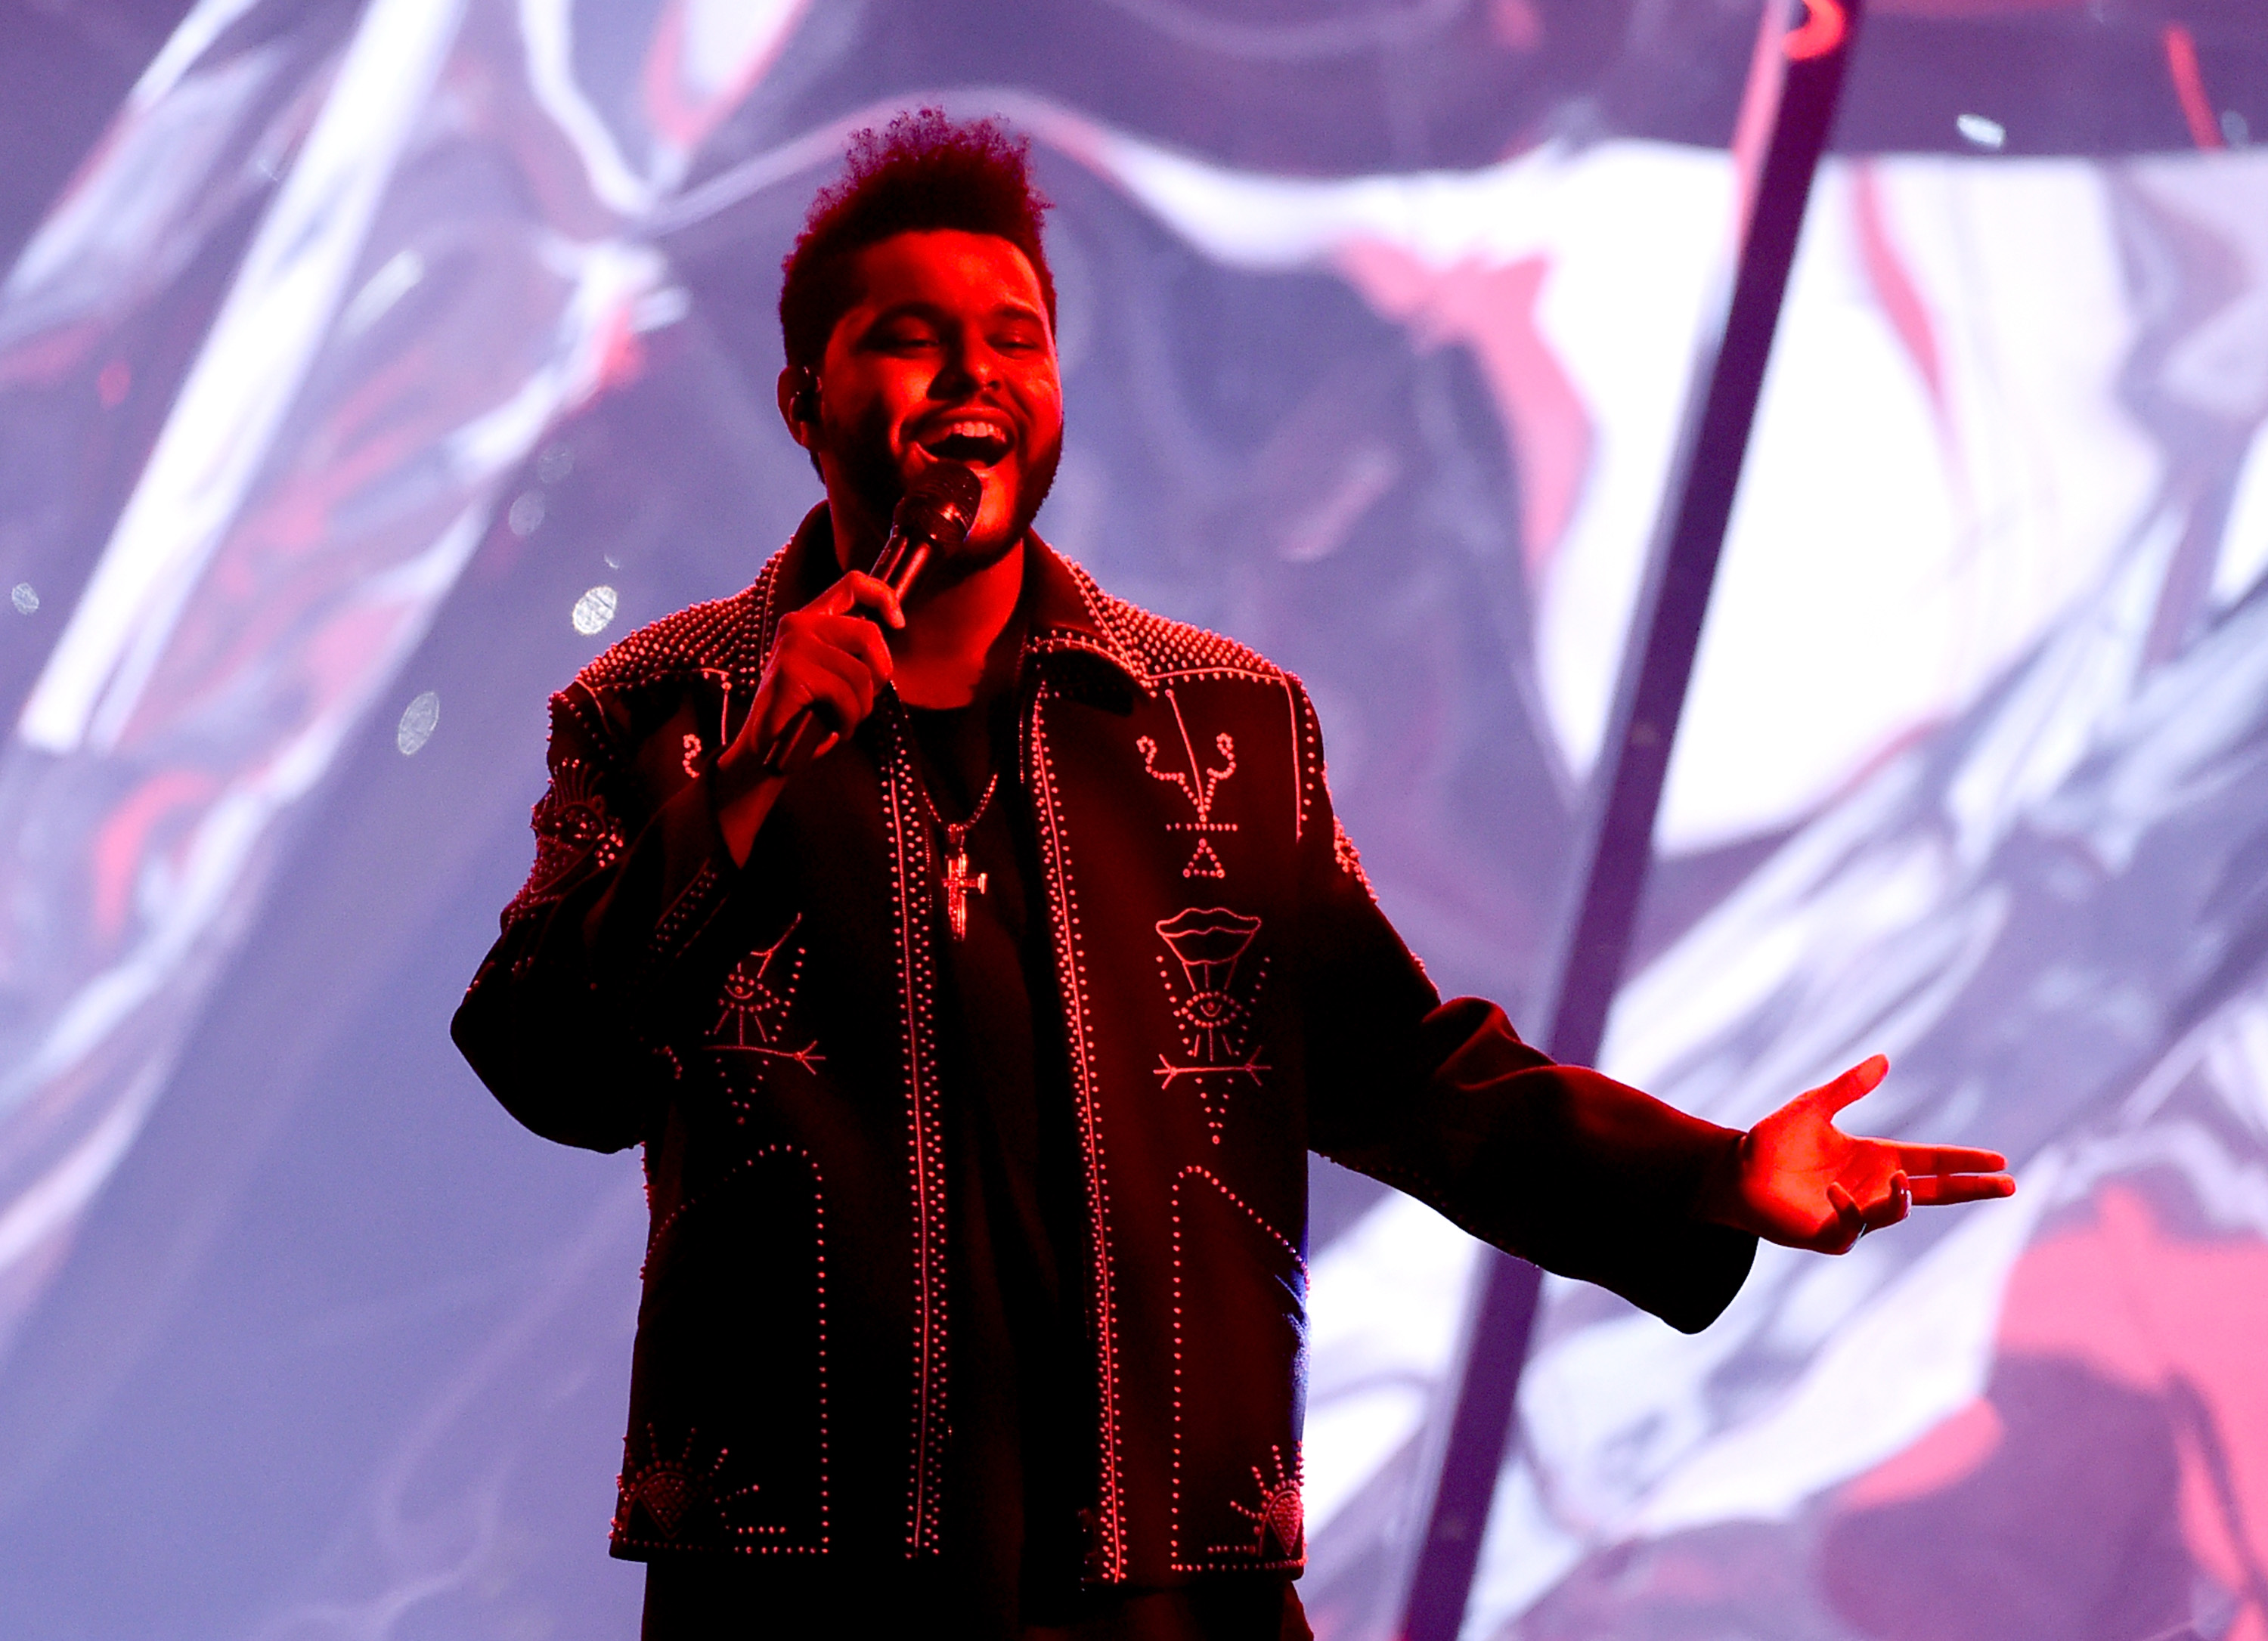 LOS ANGELES, CA - NOVEMBER 20: Recording artist The Weeknd performs onstage during the 2016 American Music Awards at Microsoft Theater on November 20, 2016 in Los Angeles, California. Kevin Winter/Getty Images/AFP